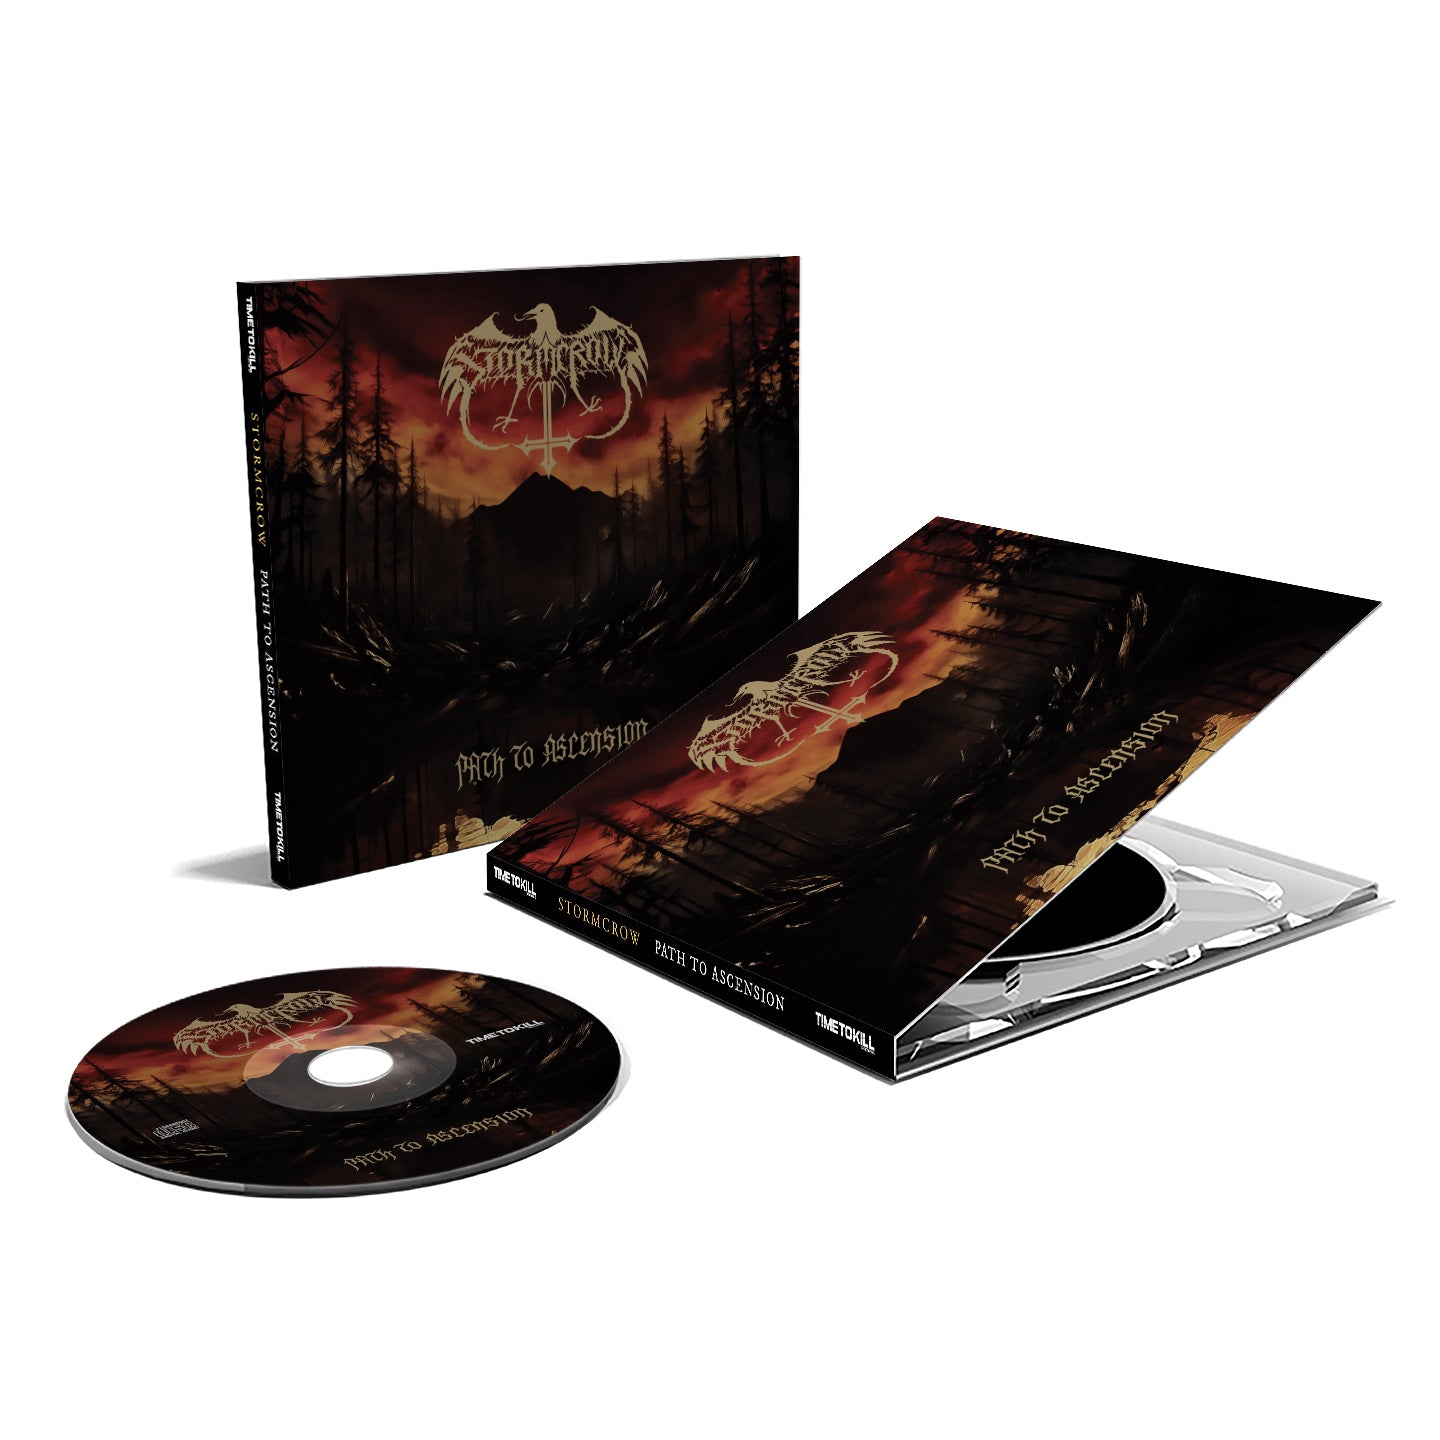 Stormcrow "Path to Ascension" cd digipack